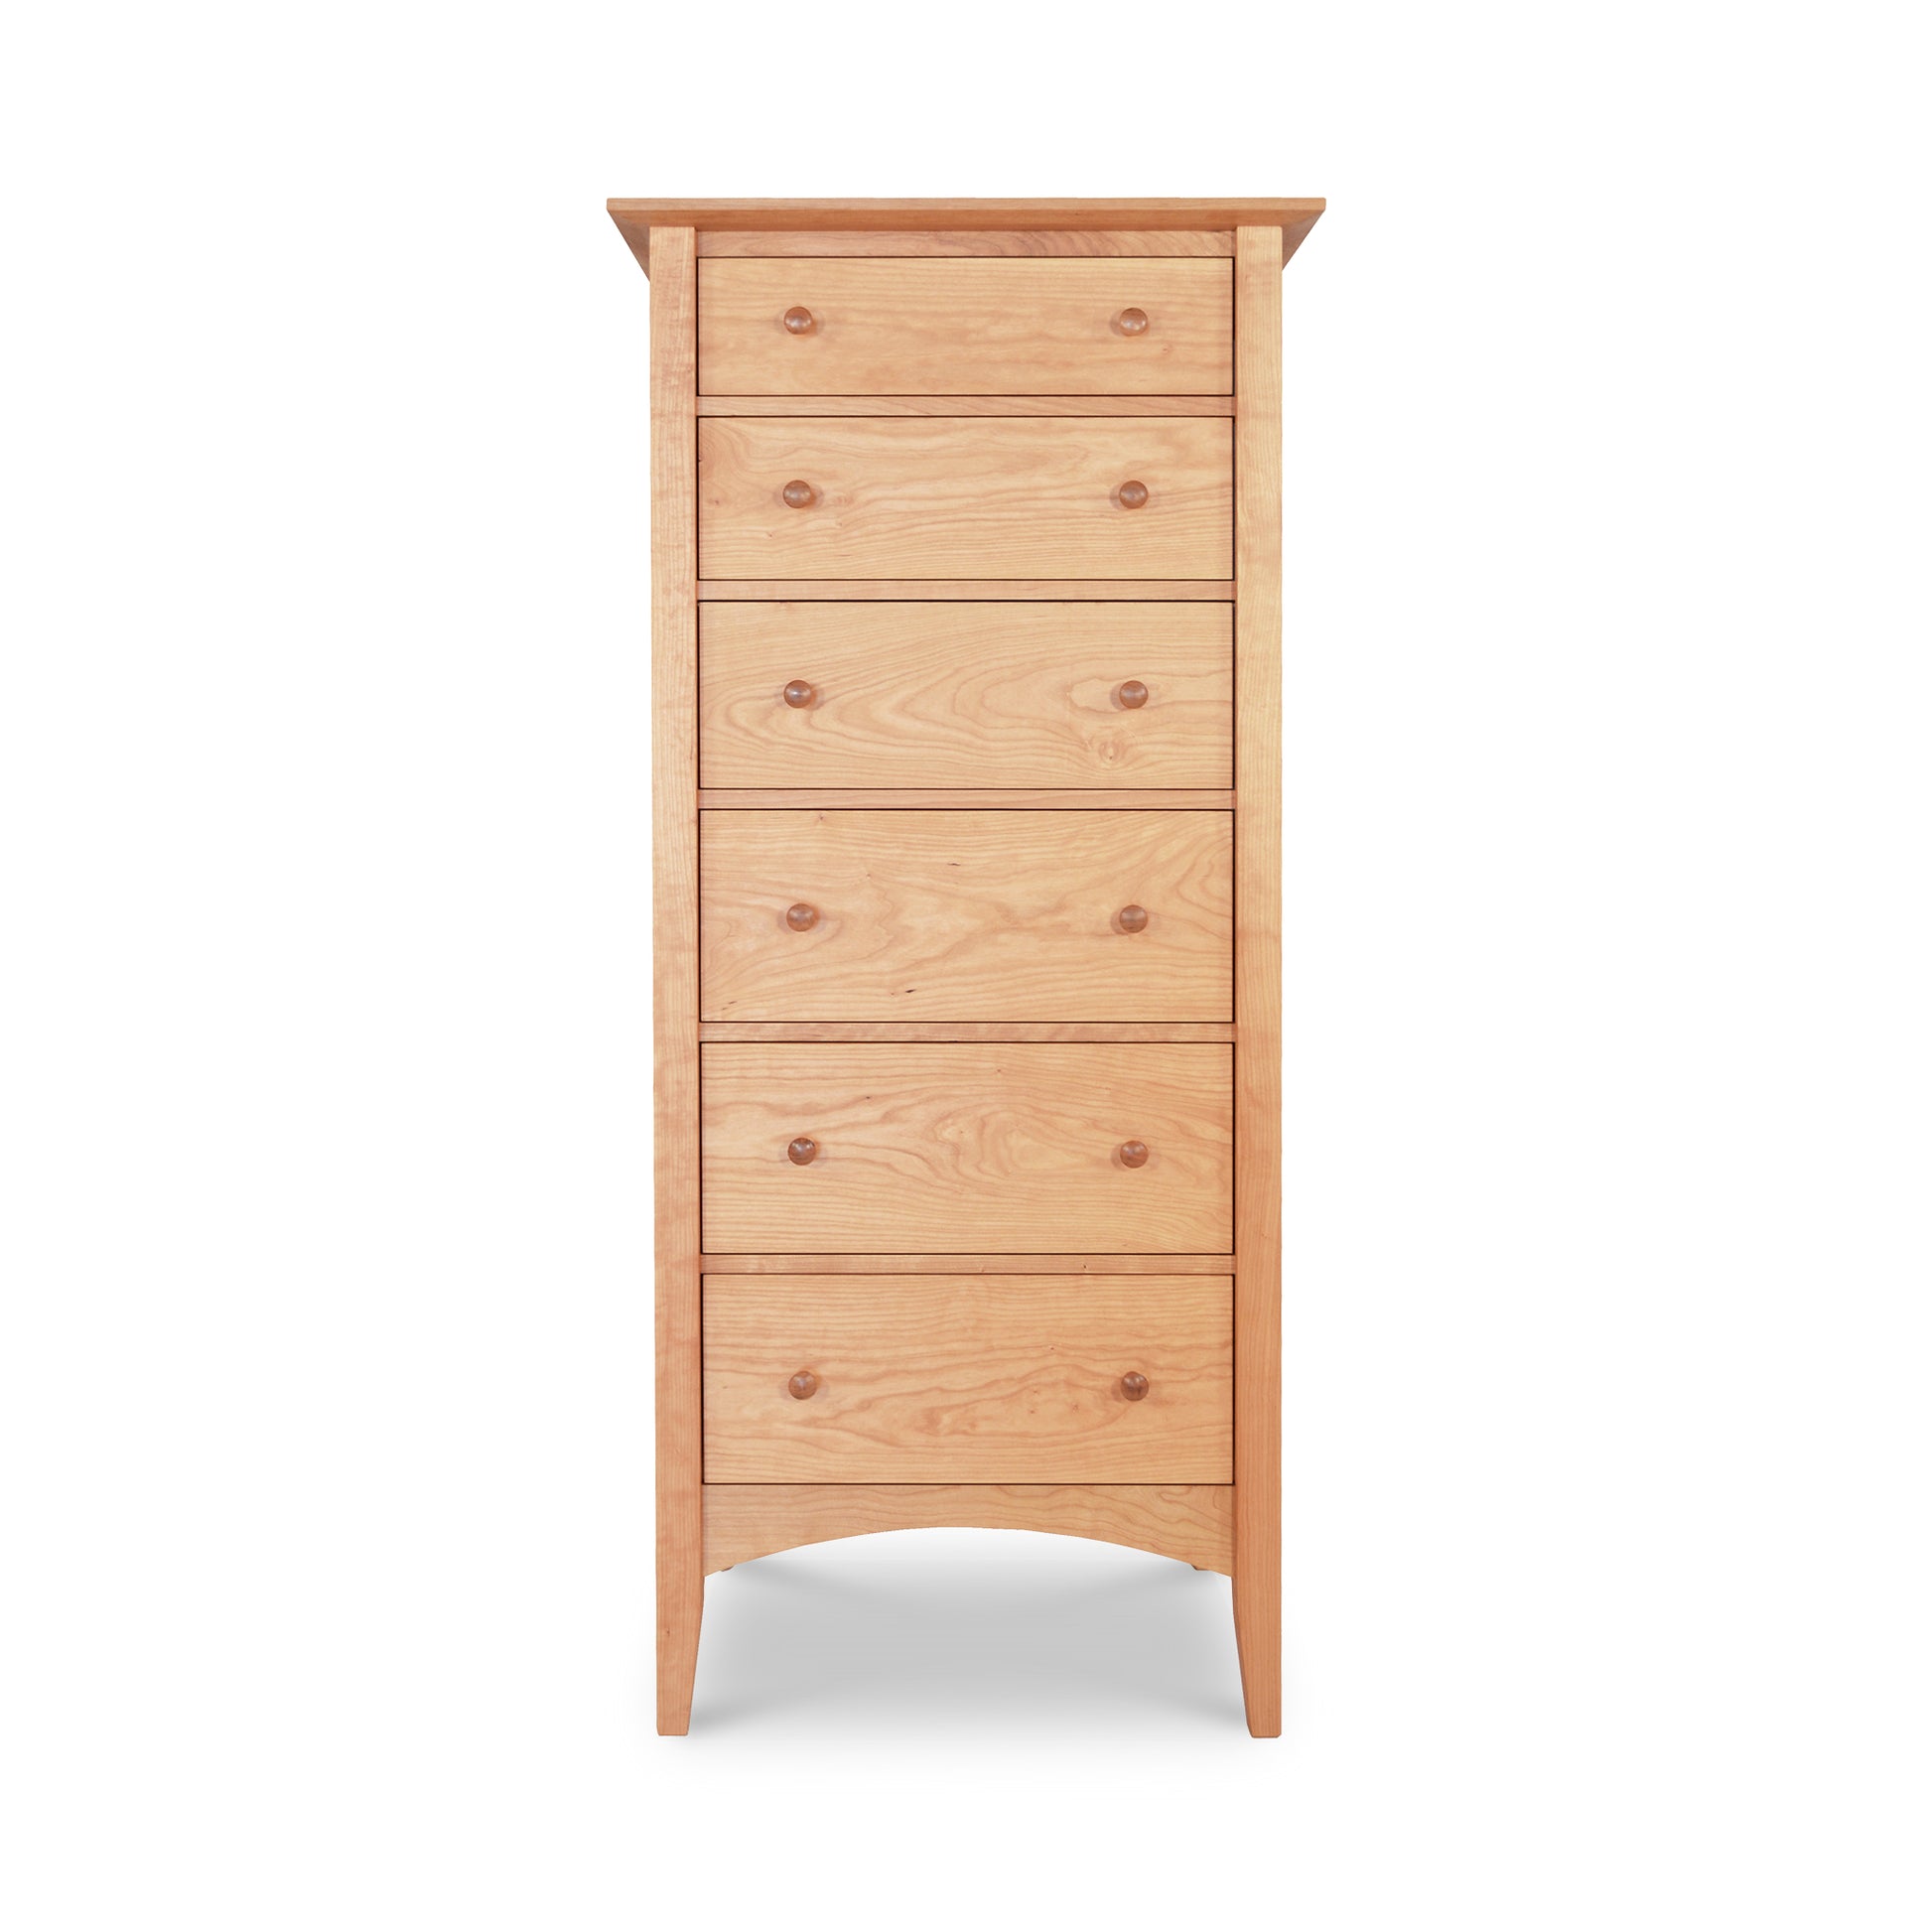 A tall, narrow American Shaker Lingerie Chest from Maple Corner Woodworks with five drawers, each featuring a round, wooden knob. The dresser has a slightly overhanging top and stands upright against a